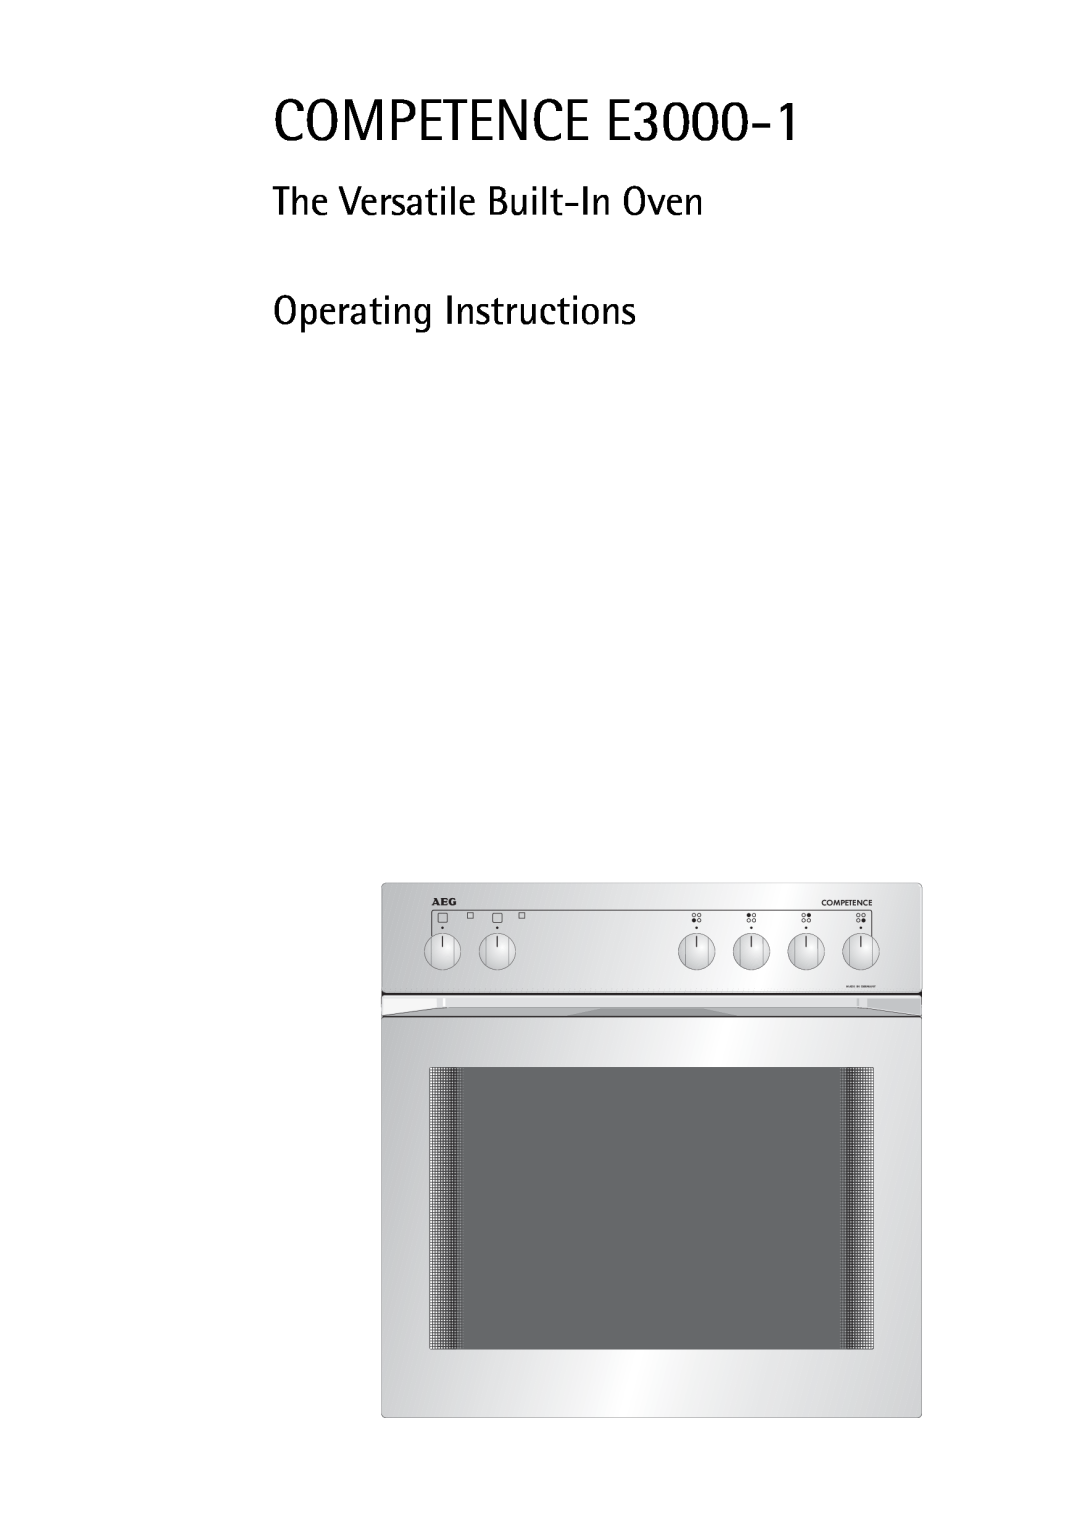 AEG manual The Versatile Built-InOven Operating Instructions, COMPETENCE E3000-1, Competence, Made In Germany 